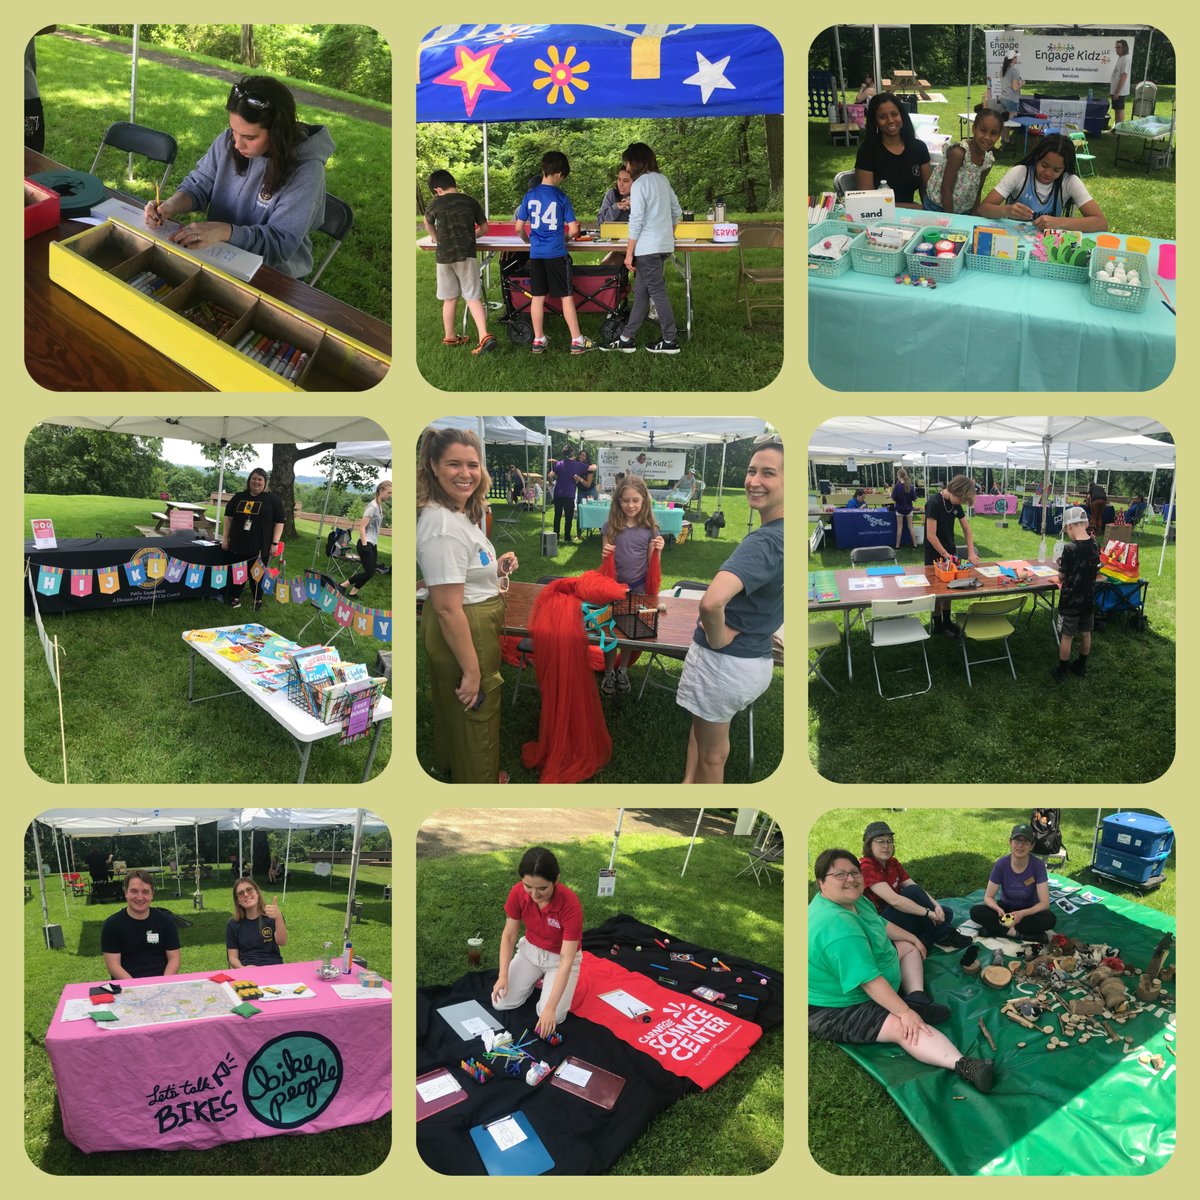 It was a BEAUTIFUL afternoon in @Pittsburgh’s Riverview Park for ULTIMATE PLAY DAY!

We had a blast with our friends from @Trying_Together , Playful Pittsburgh, @remakelearning & everyone who came out to play! Thanks to all the kids & families who stopped by for the playful fun!